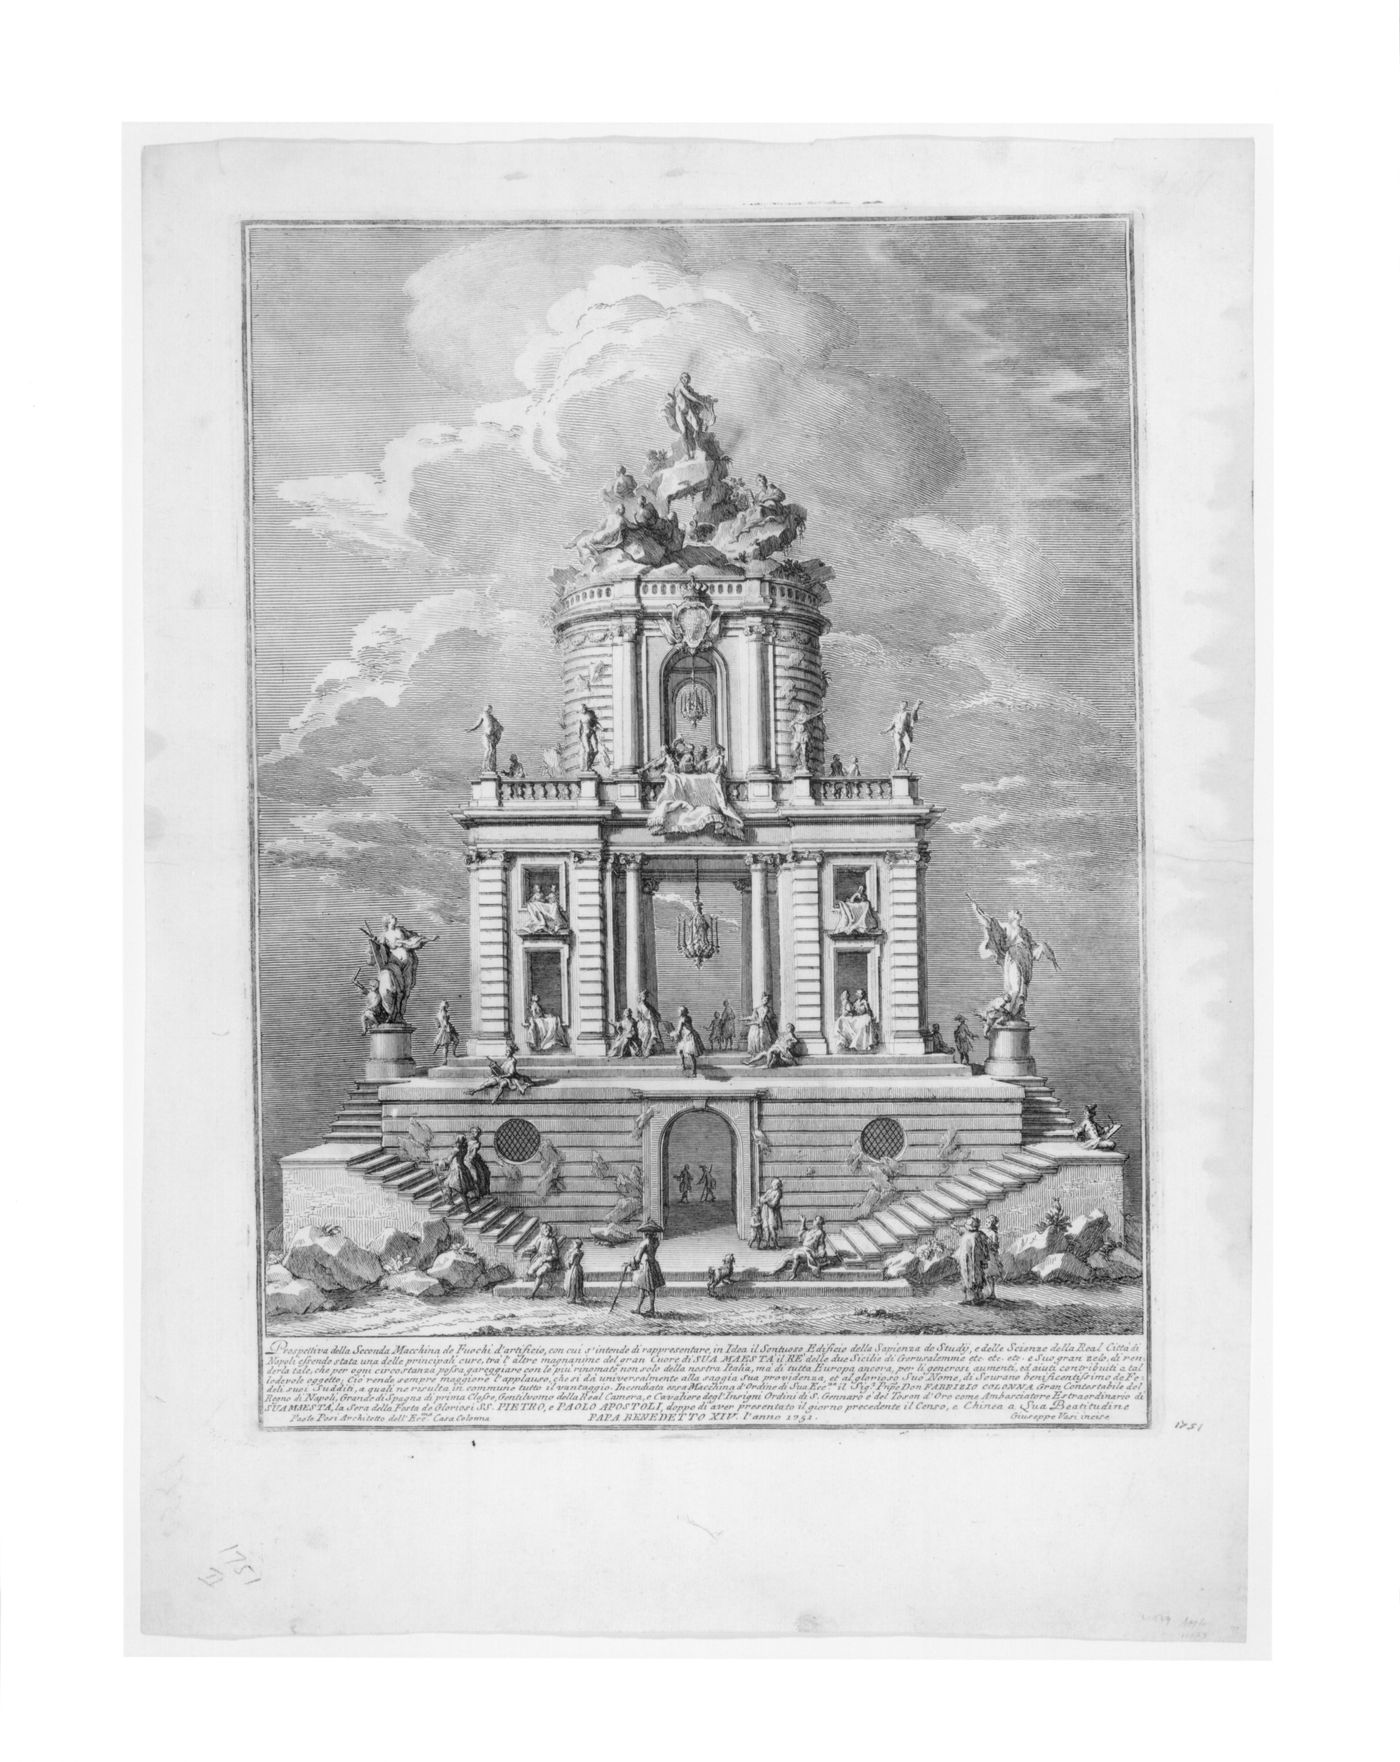 Etching of Posi's design for the "seconda macchina" of 1751